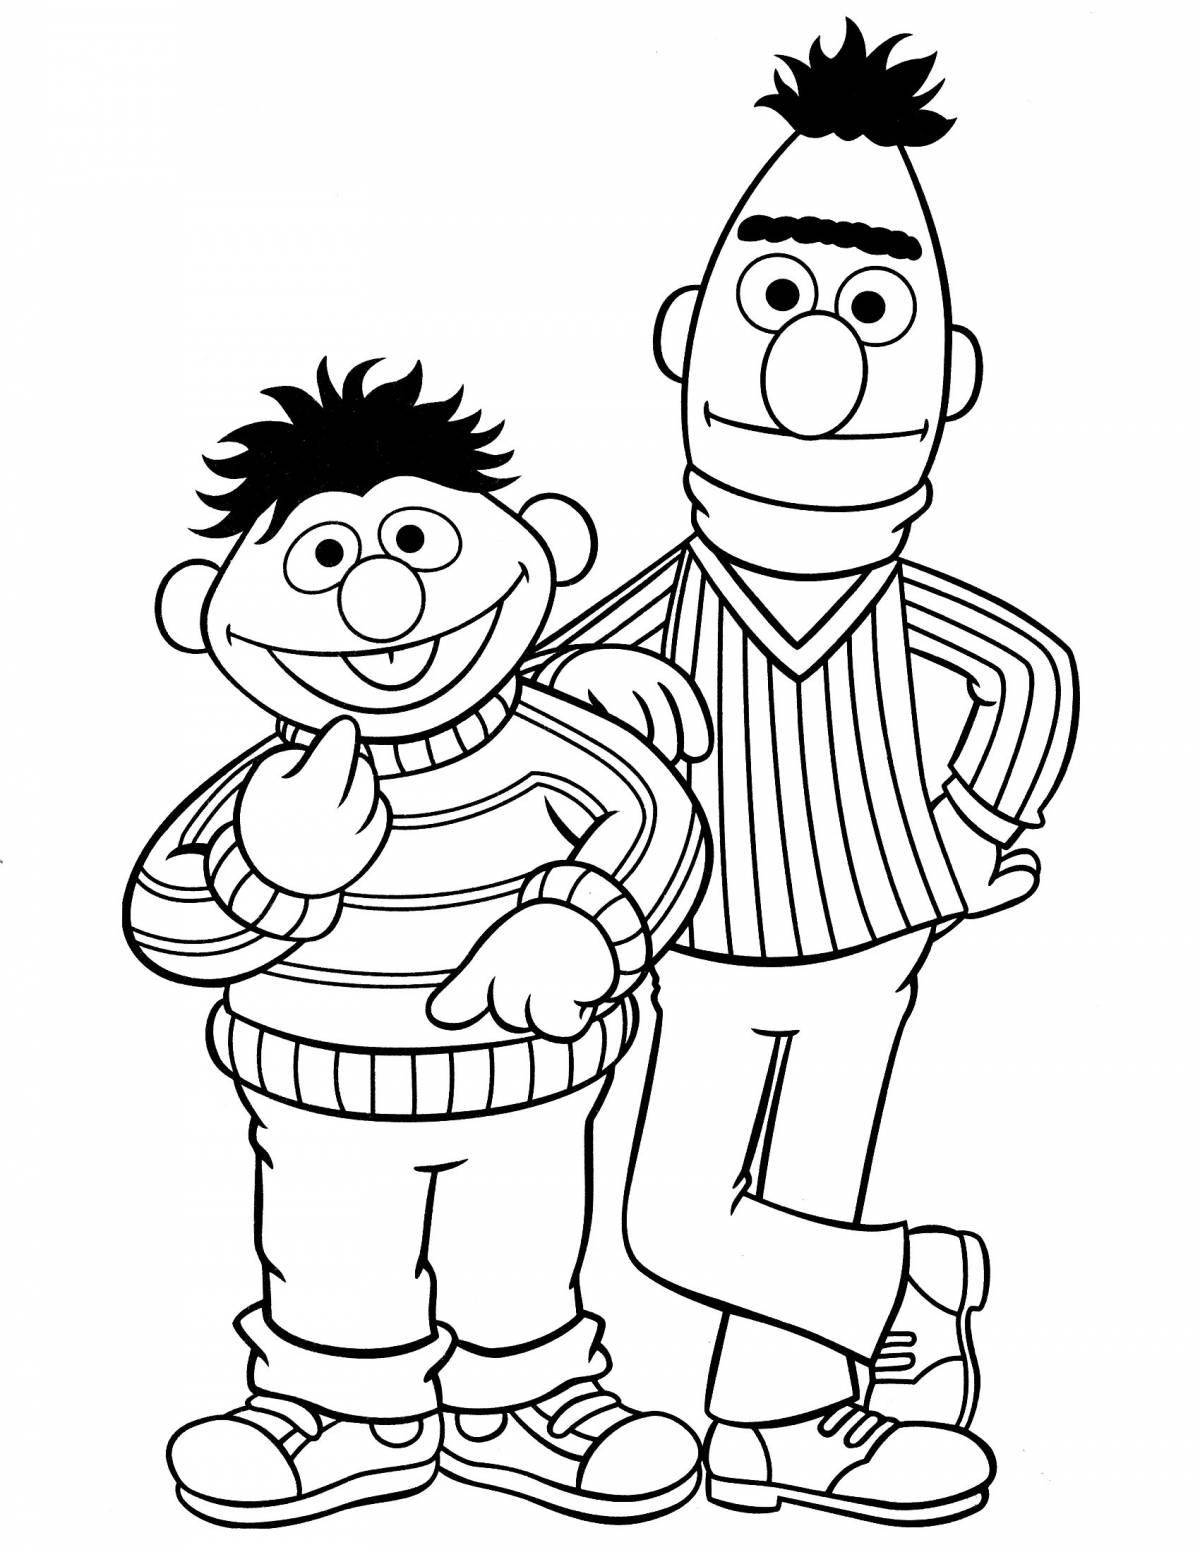 Color filled sesame street coloring page